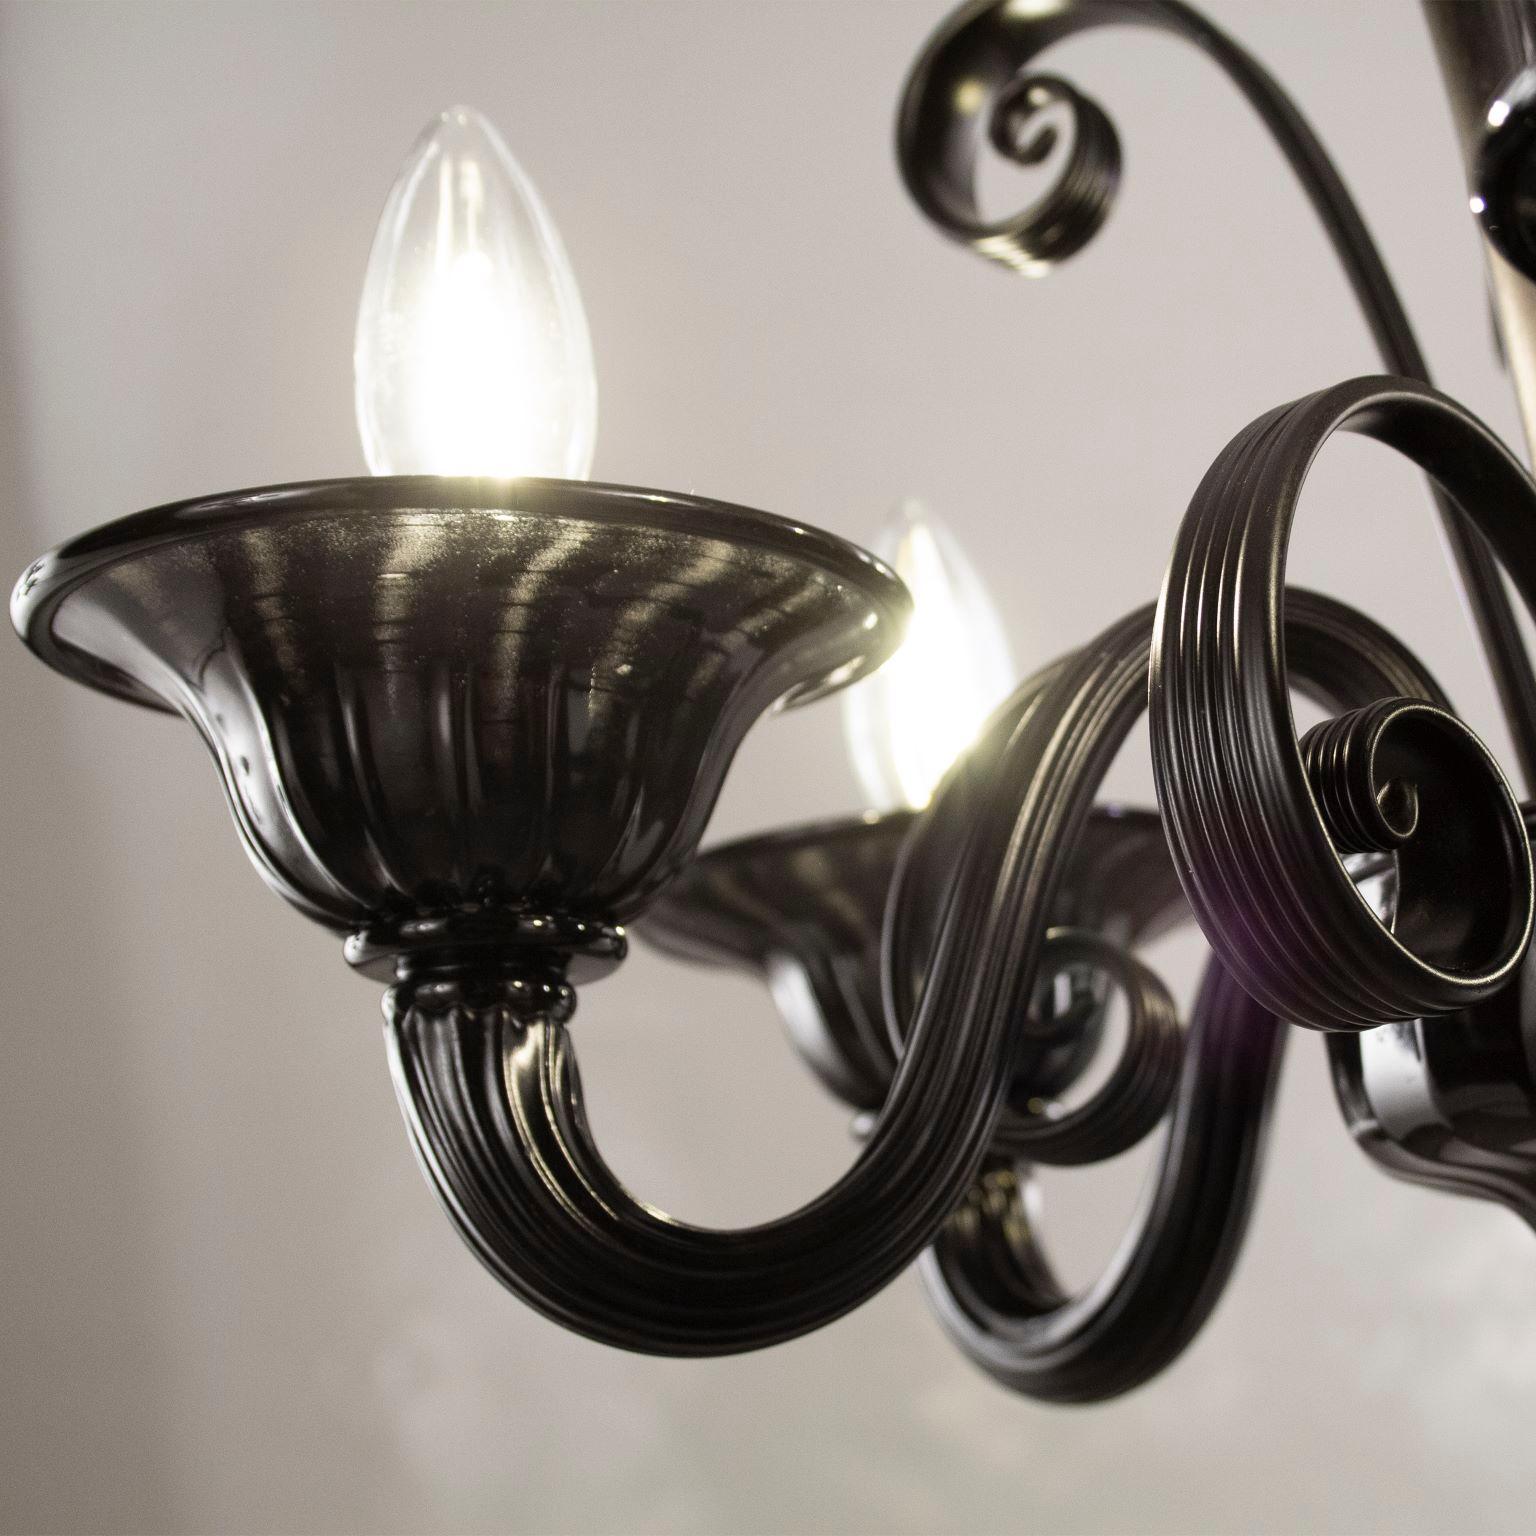 Capriccio by Multiforme is a chandelier, in black artistic glass, with curly ornamental elements.
Inspired by the classic Venetian tradition it is characterized by a central column where many blown glass “pastoral” elements are installed. These curl